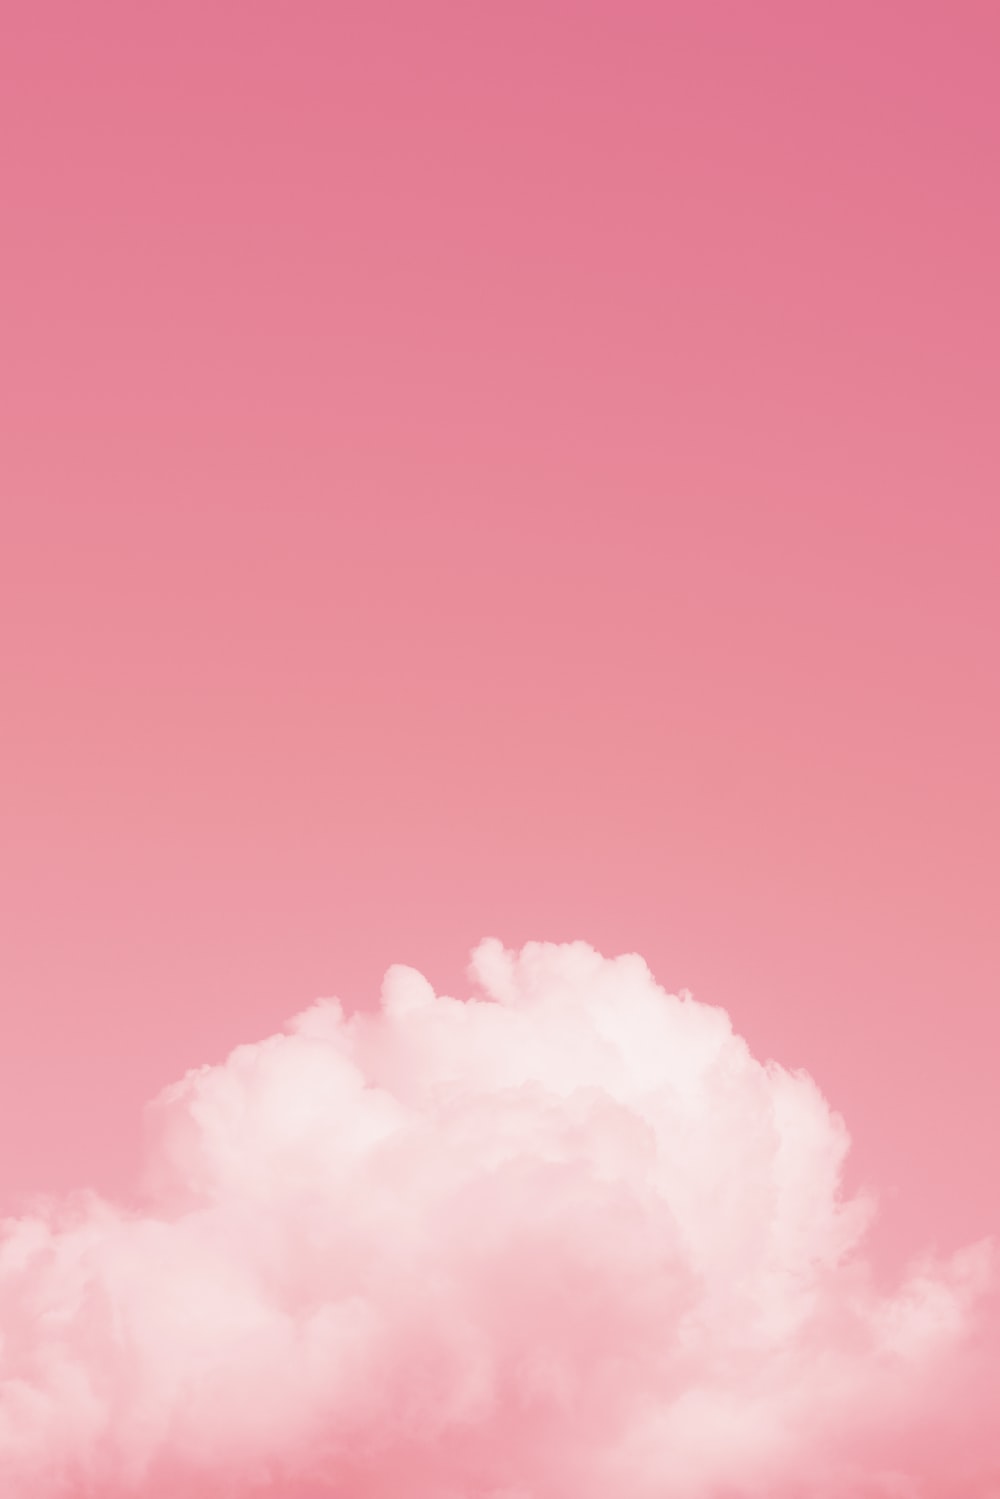 Pink Cloud Picture. Download Free Image